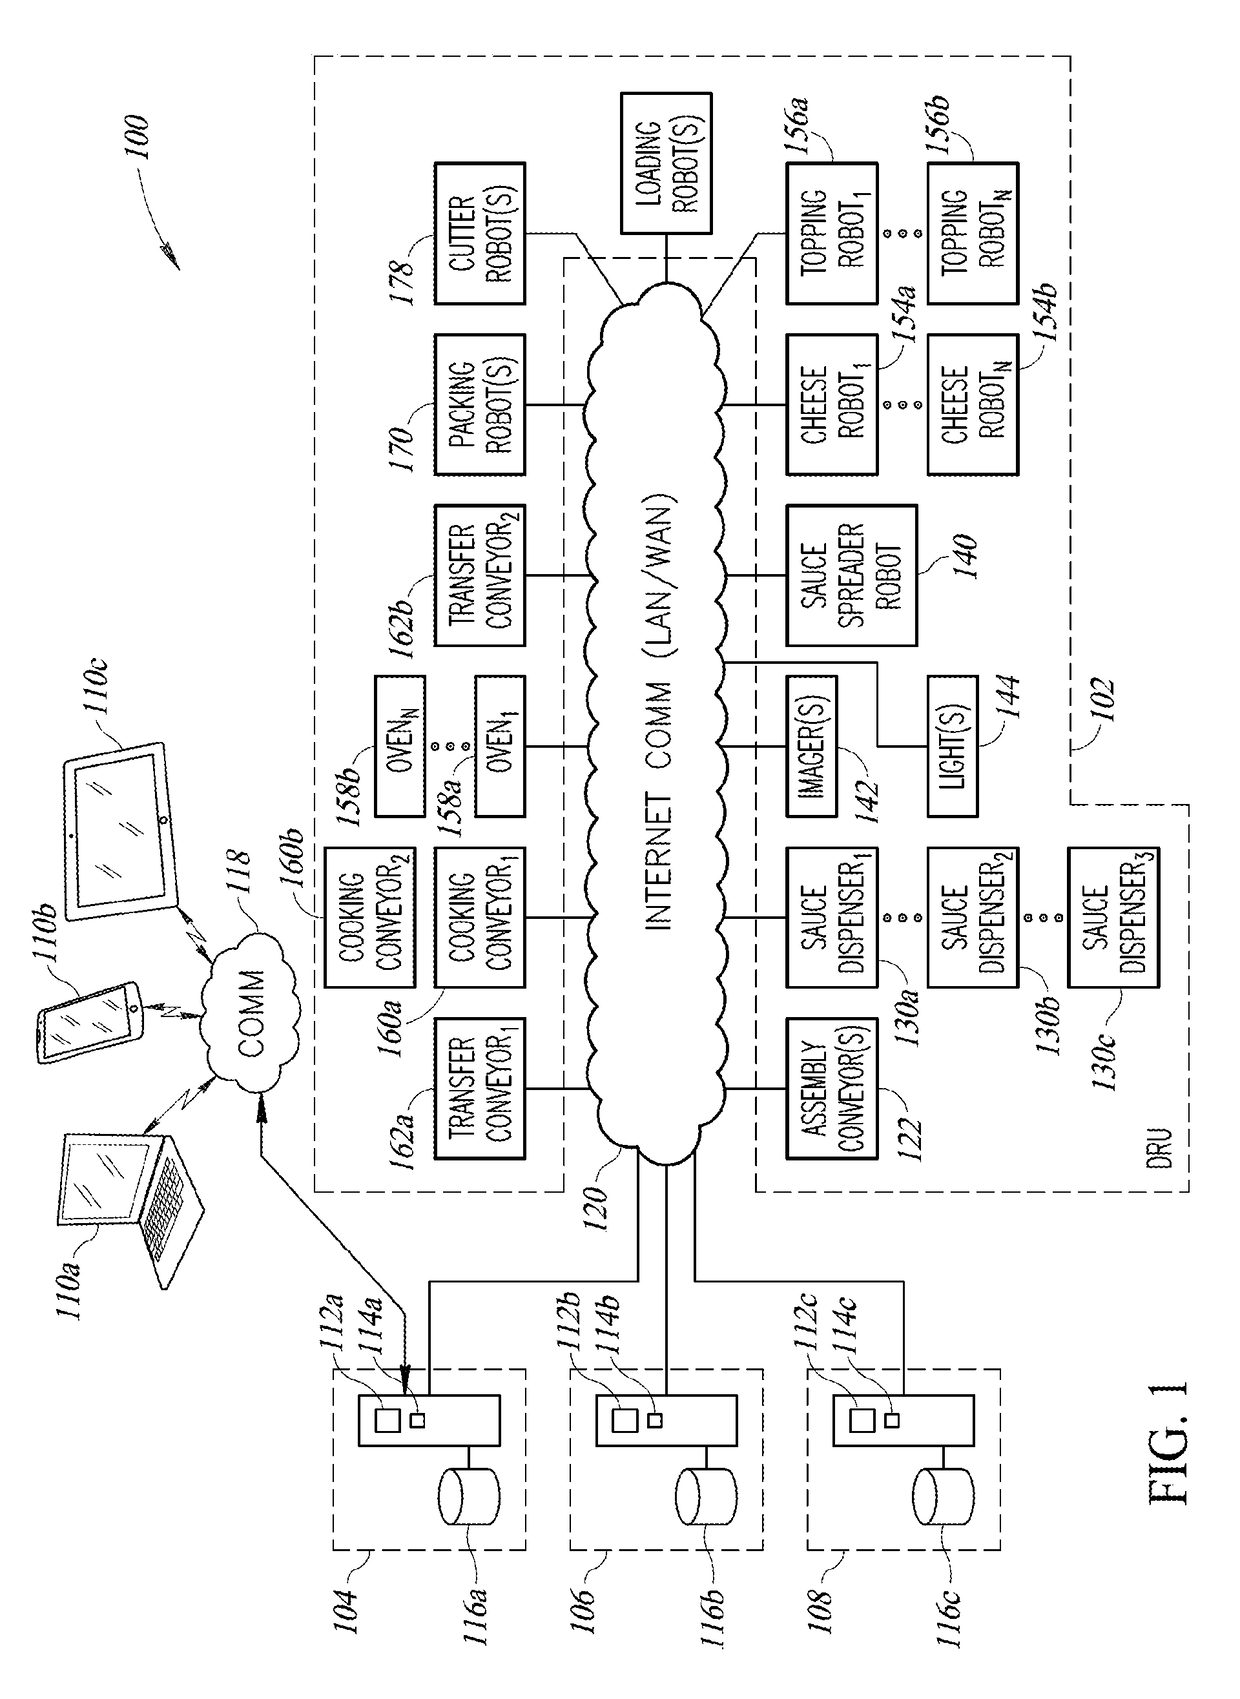 On-demand robotic food assembly and related systems, devices and methods